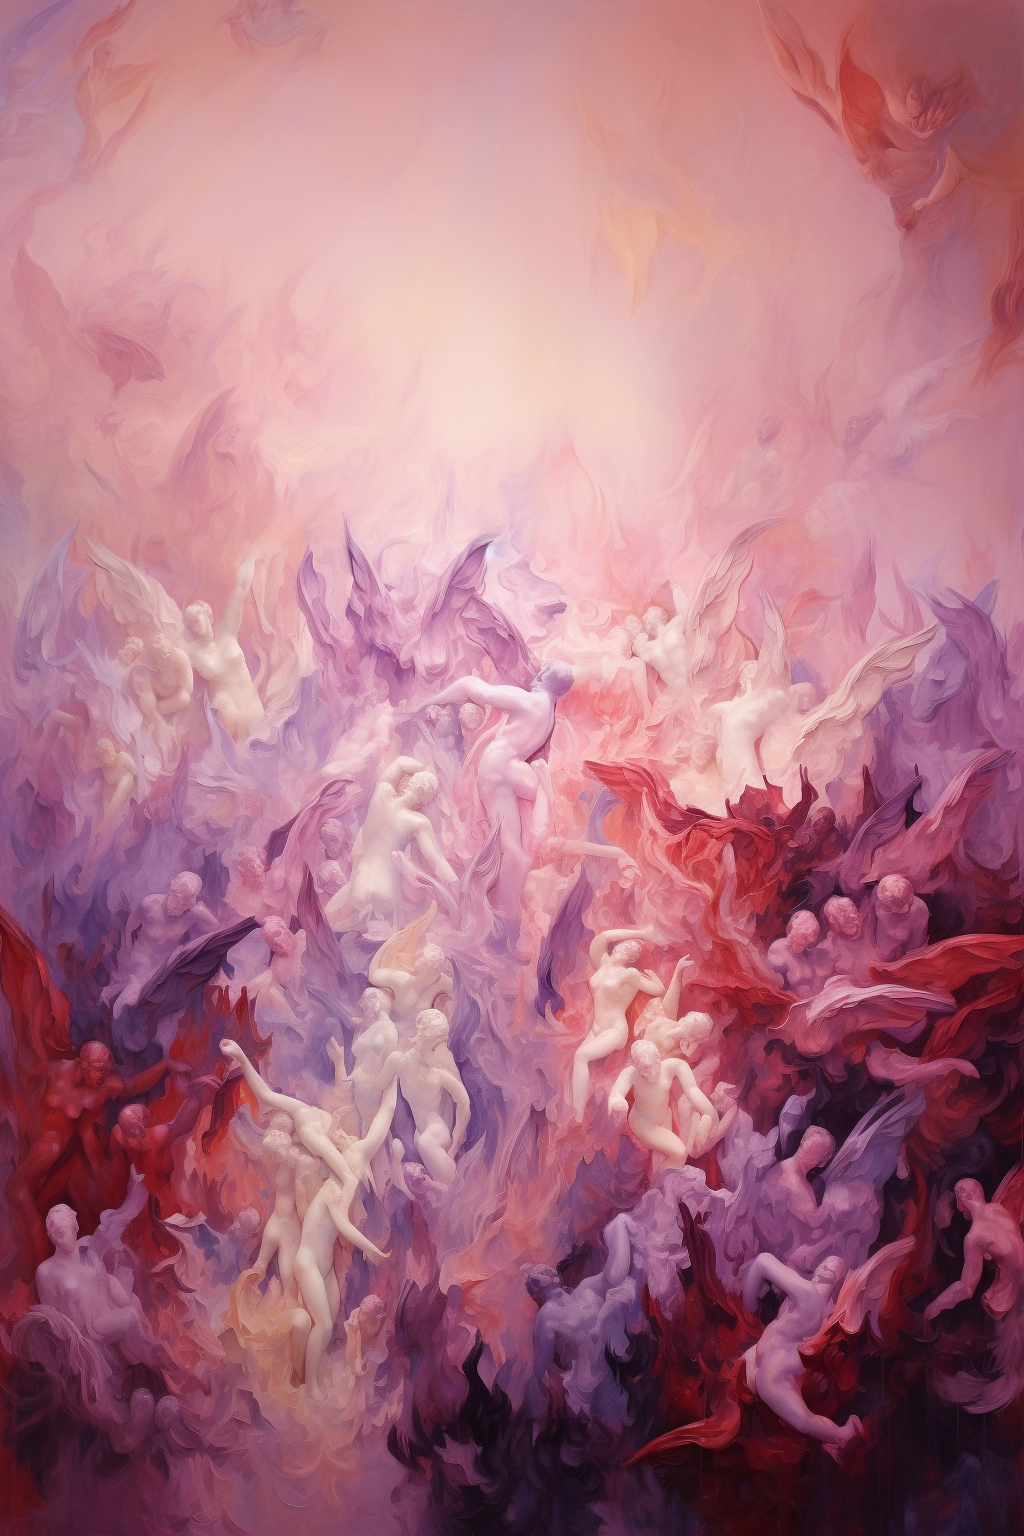 Ethereal Blush: Abstract Angels